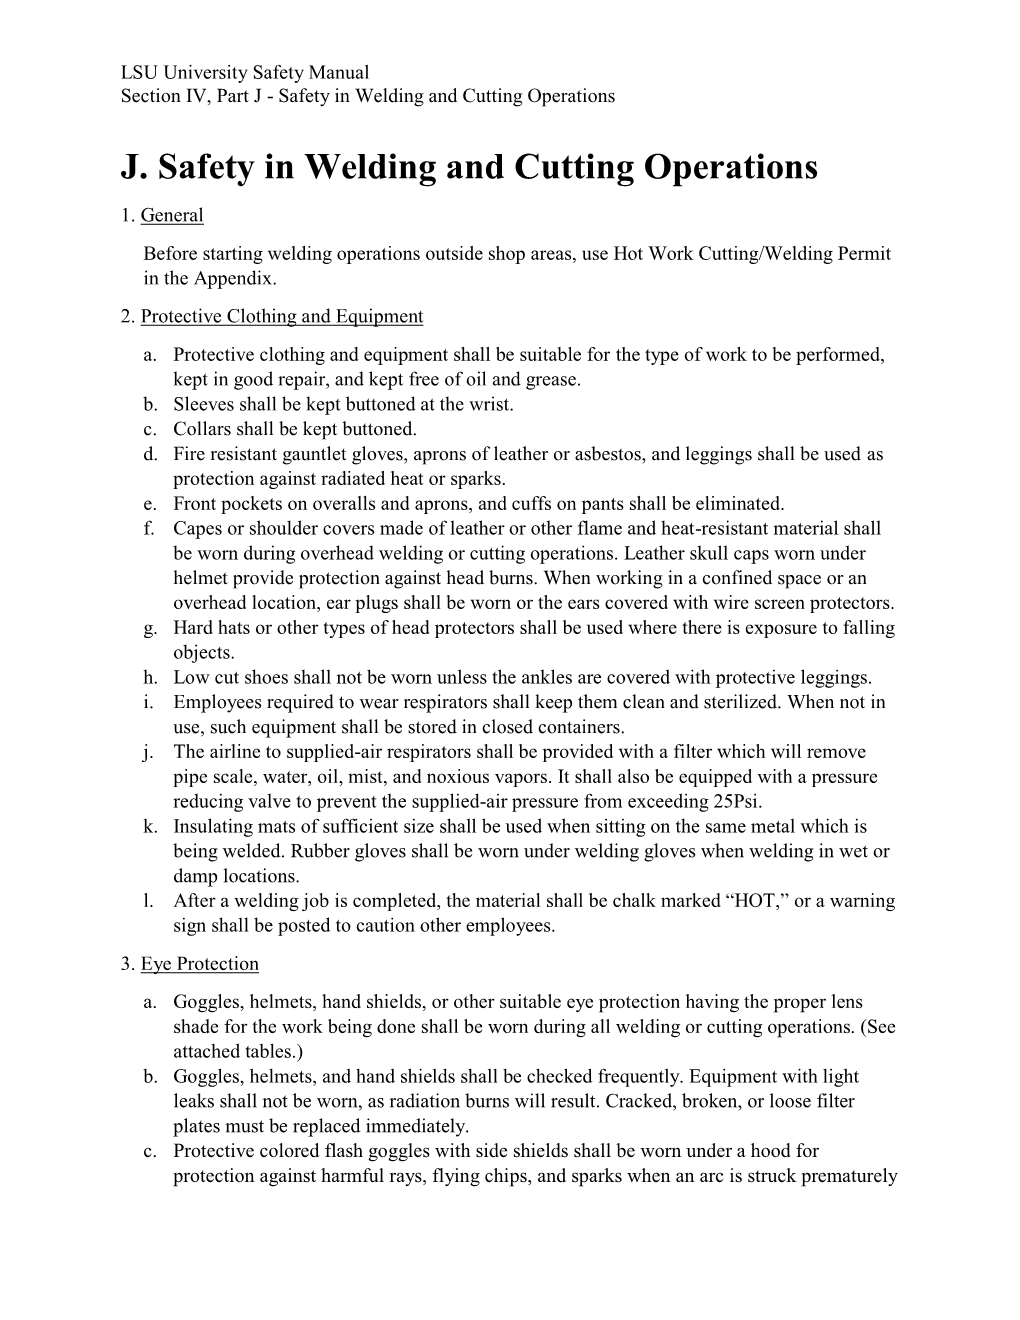 J. Safety in Welding and Cutting Operations 1